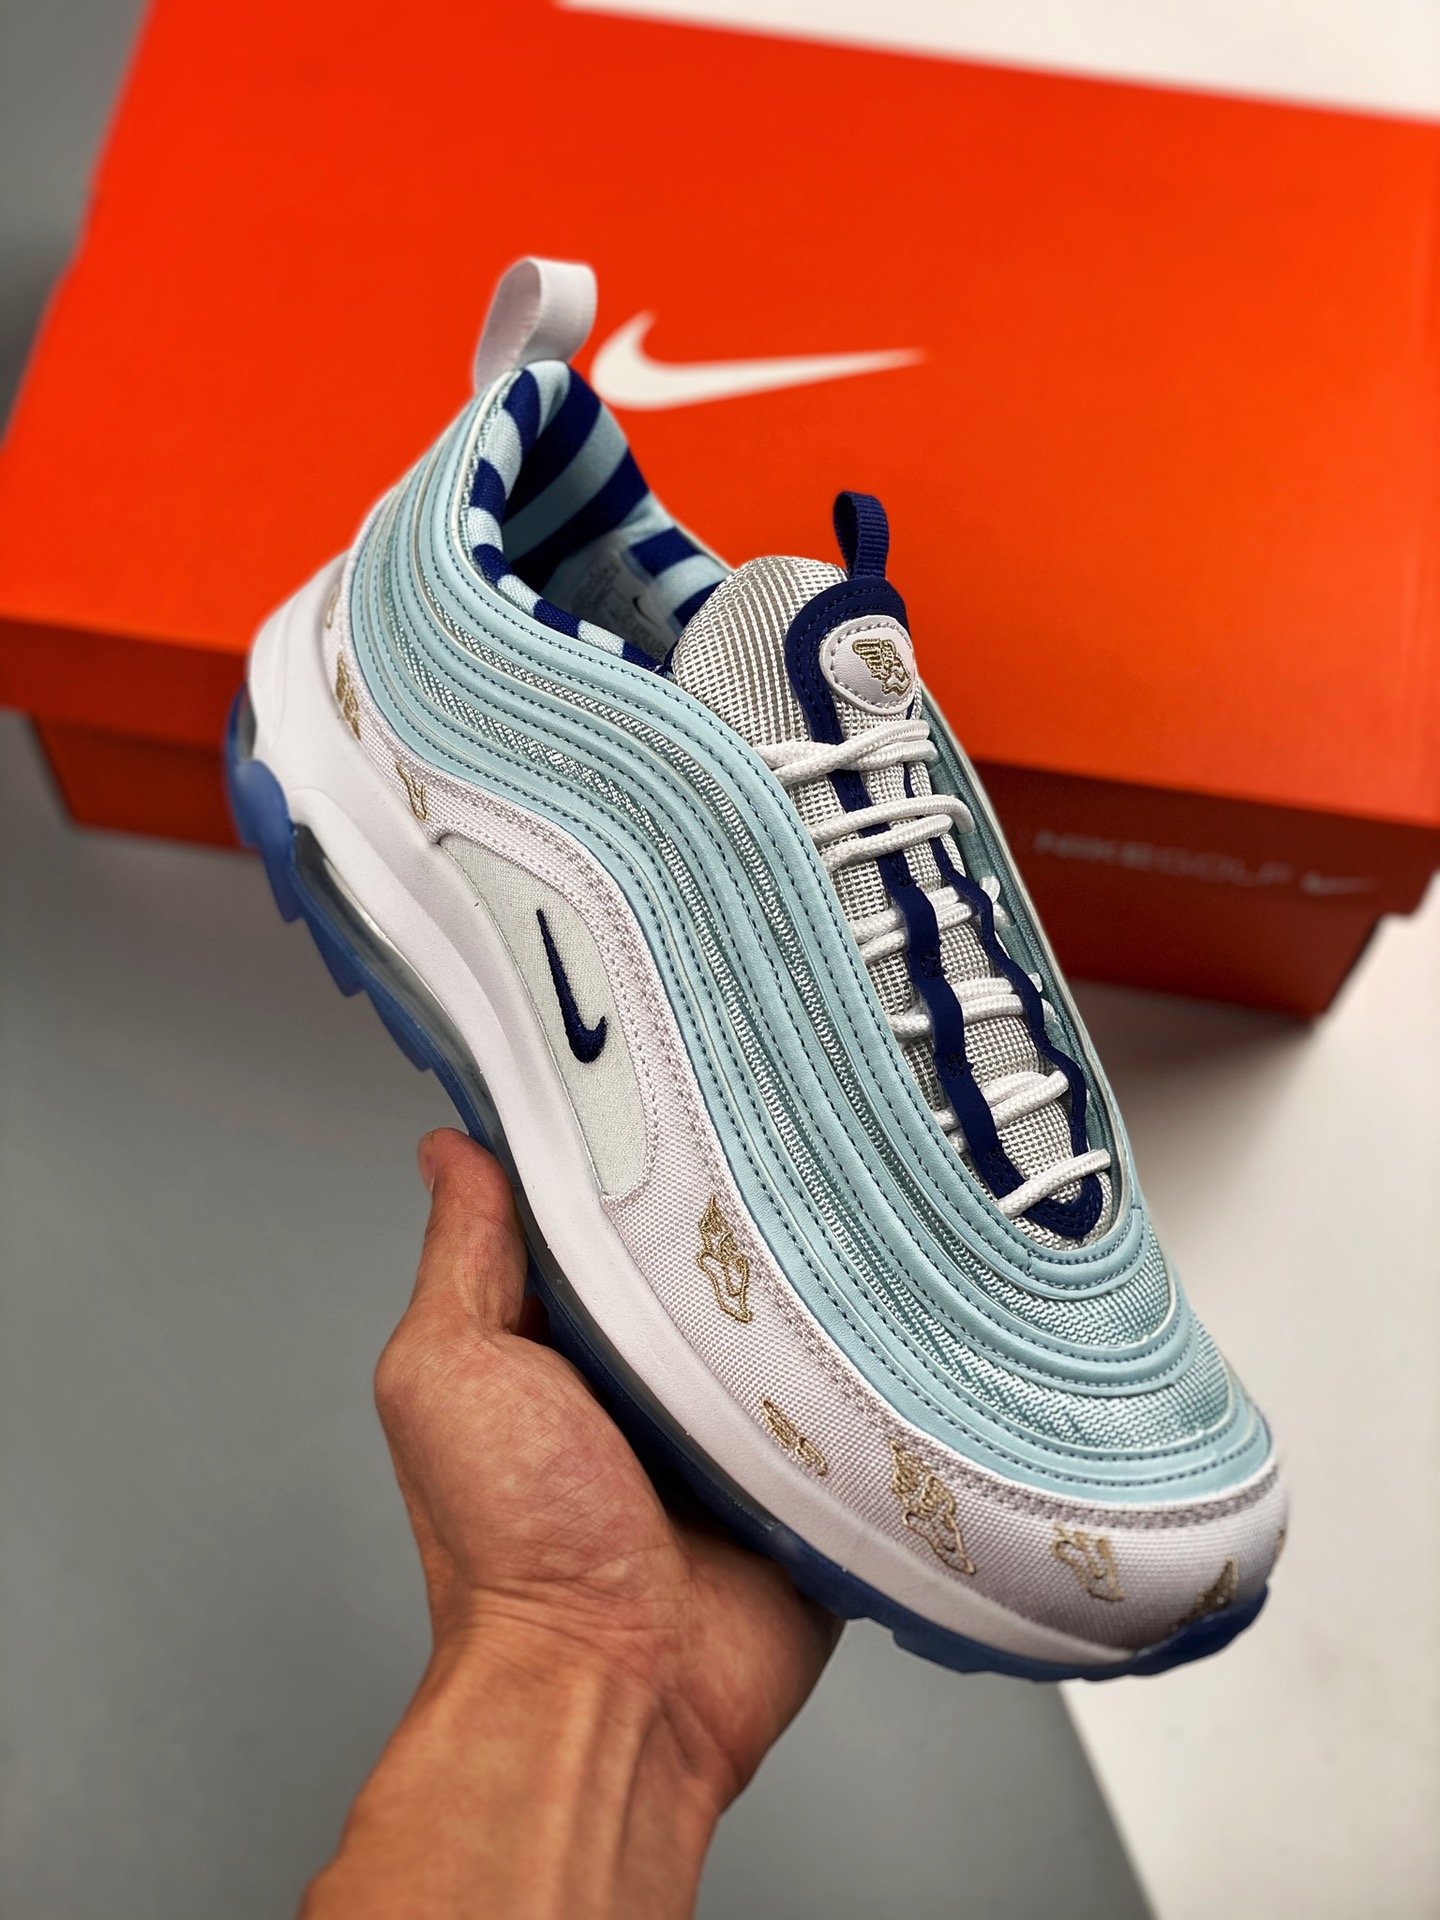 Nike Air Max 97 Golf "Wing It" CK1220-100 Shoes